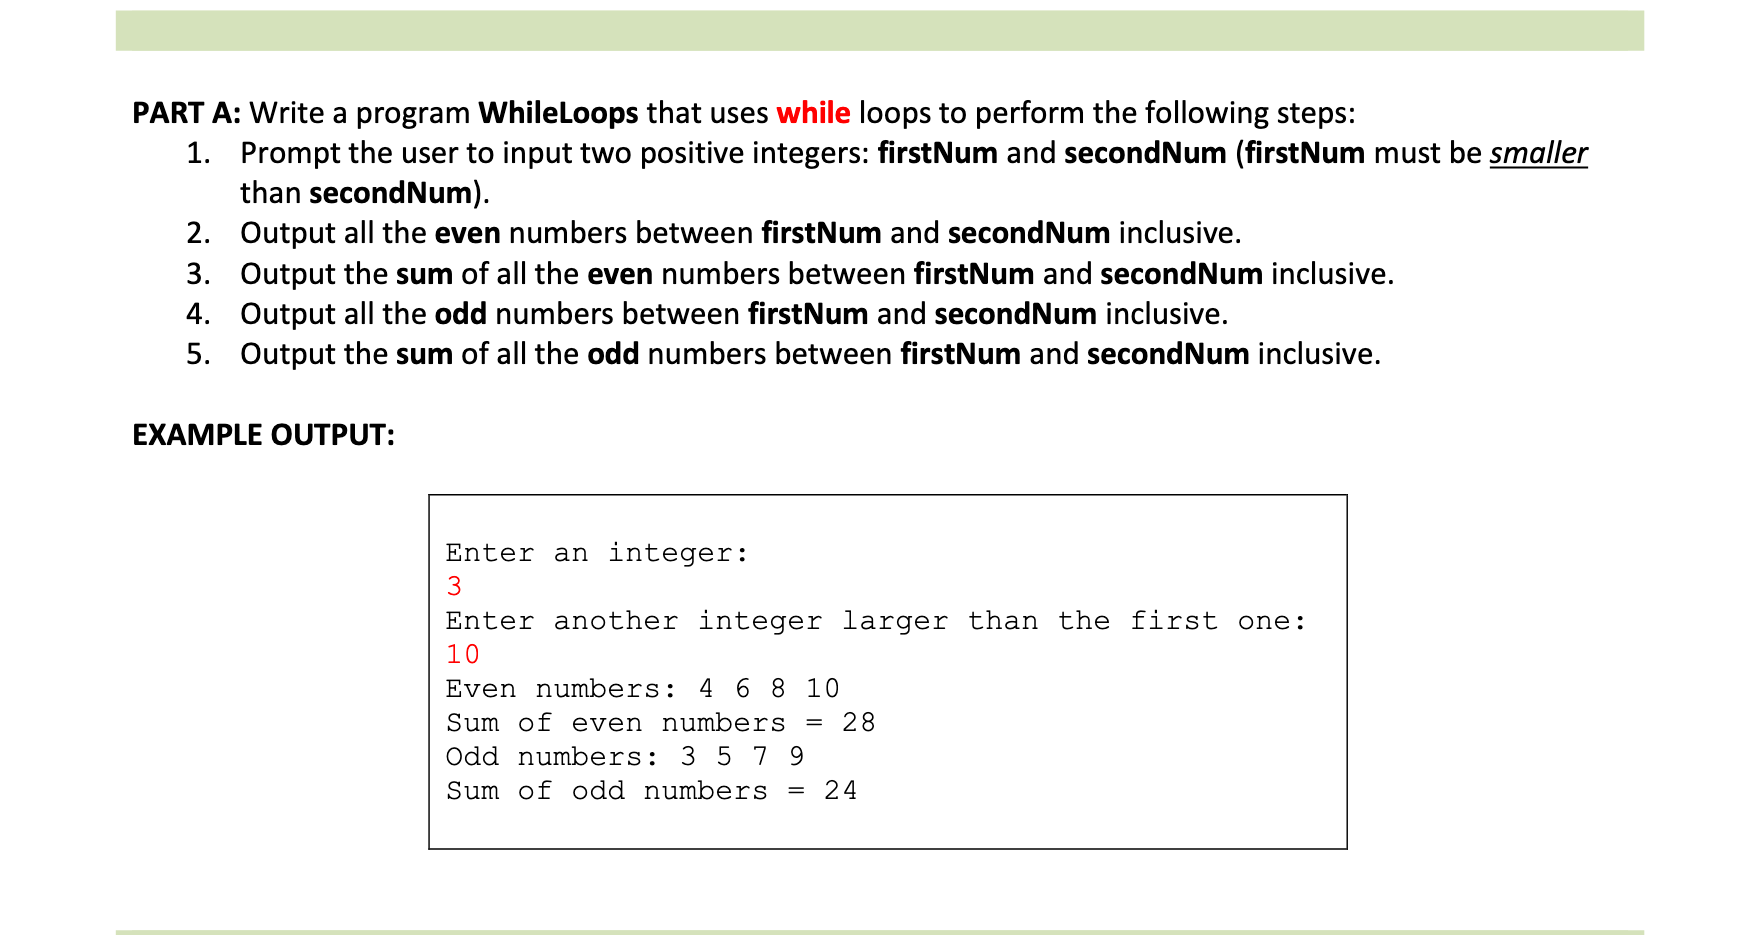 PART A: Write a program WhileLoops that uses while loops to perform the following steps:
1. Prompt the user to input two positive integers: firstNum and secondNum (firstNum must be smaller
than secondNum).
2. Output all the even numbers between firstNum and secondNum inclusive.
3. Output the sum of all the even numbers between firstNum and secondNum inclusive.
4. Output all the odd numbers between firstNum and secondNum inclusive.
5. Output the sum of all the odd numbers between firstNum and secondNum inclusive.
EXAMPLE OUTPUT:
Enter an integer:
3
Enter another integer larger than the first one:
10
Even numbers: 4 6 8 10
Sum of even numbers
= 28
Odd numbers: 3 5 7 9
Sum of odd numbers
= 24
